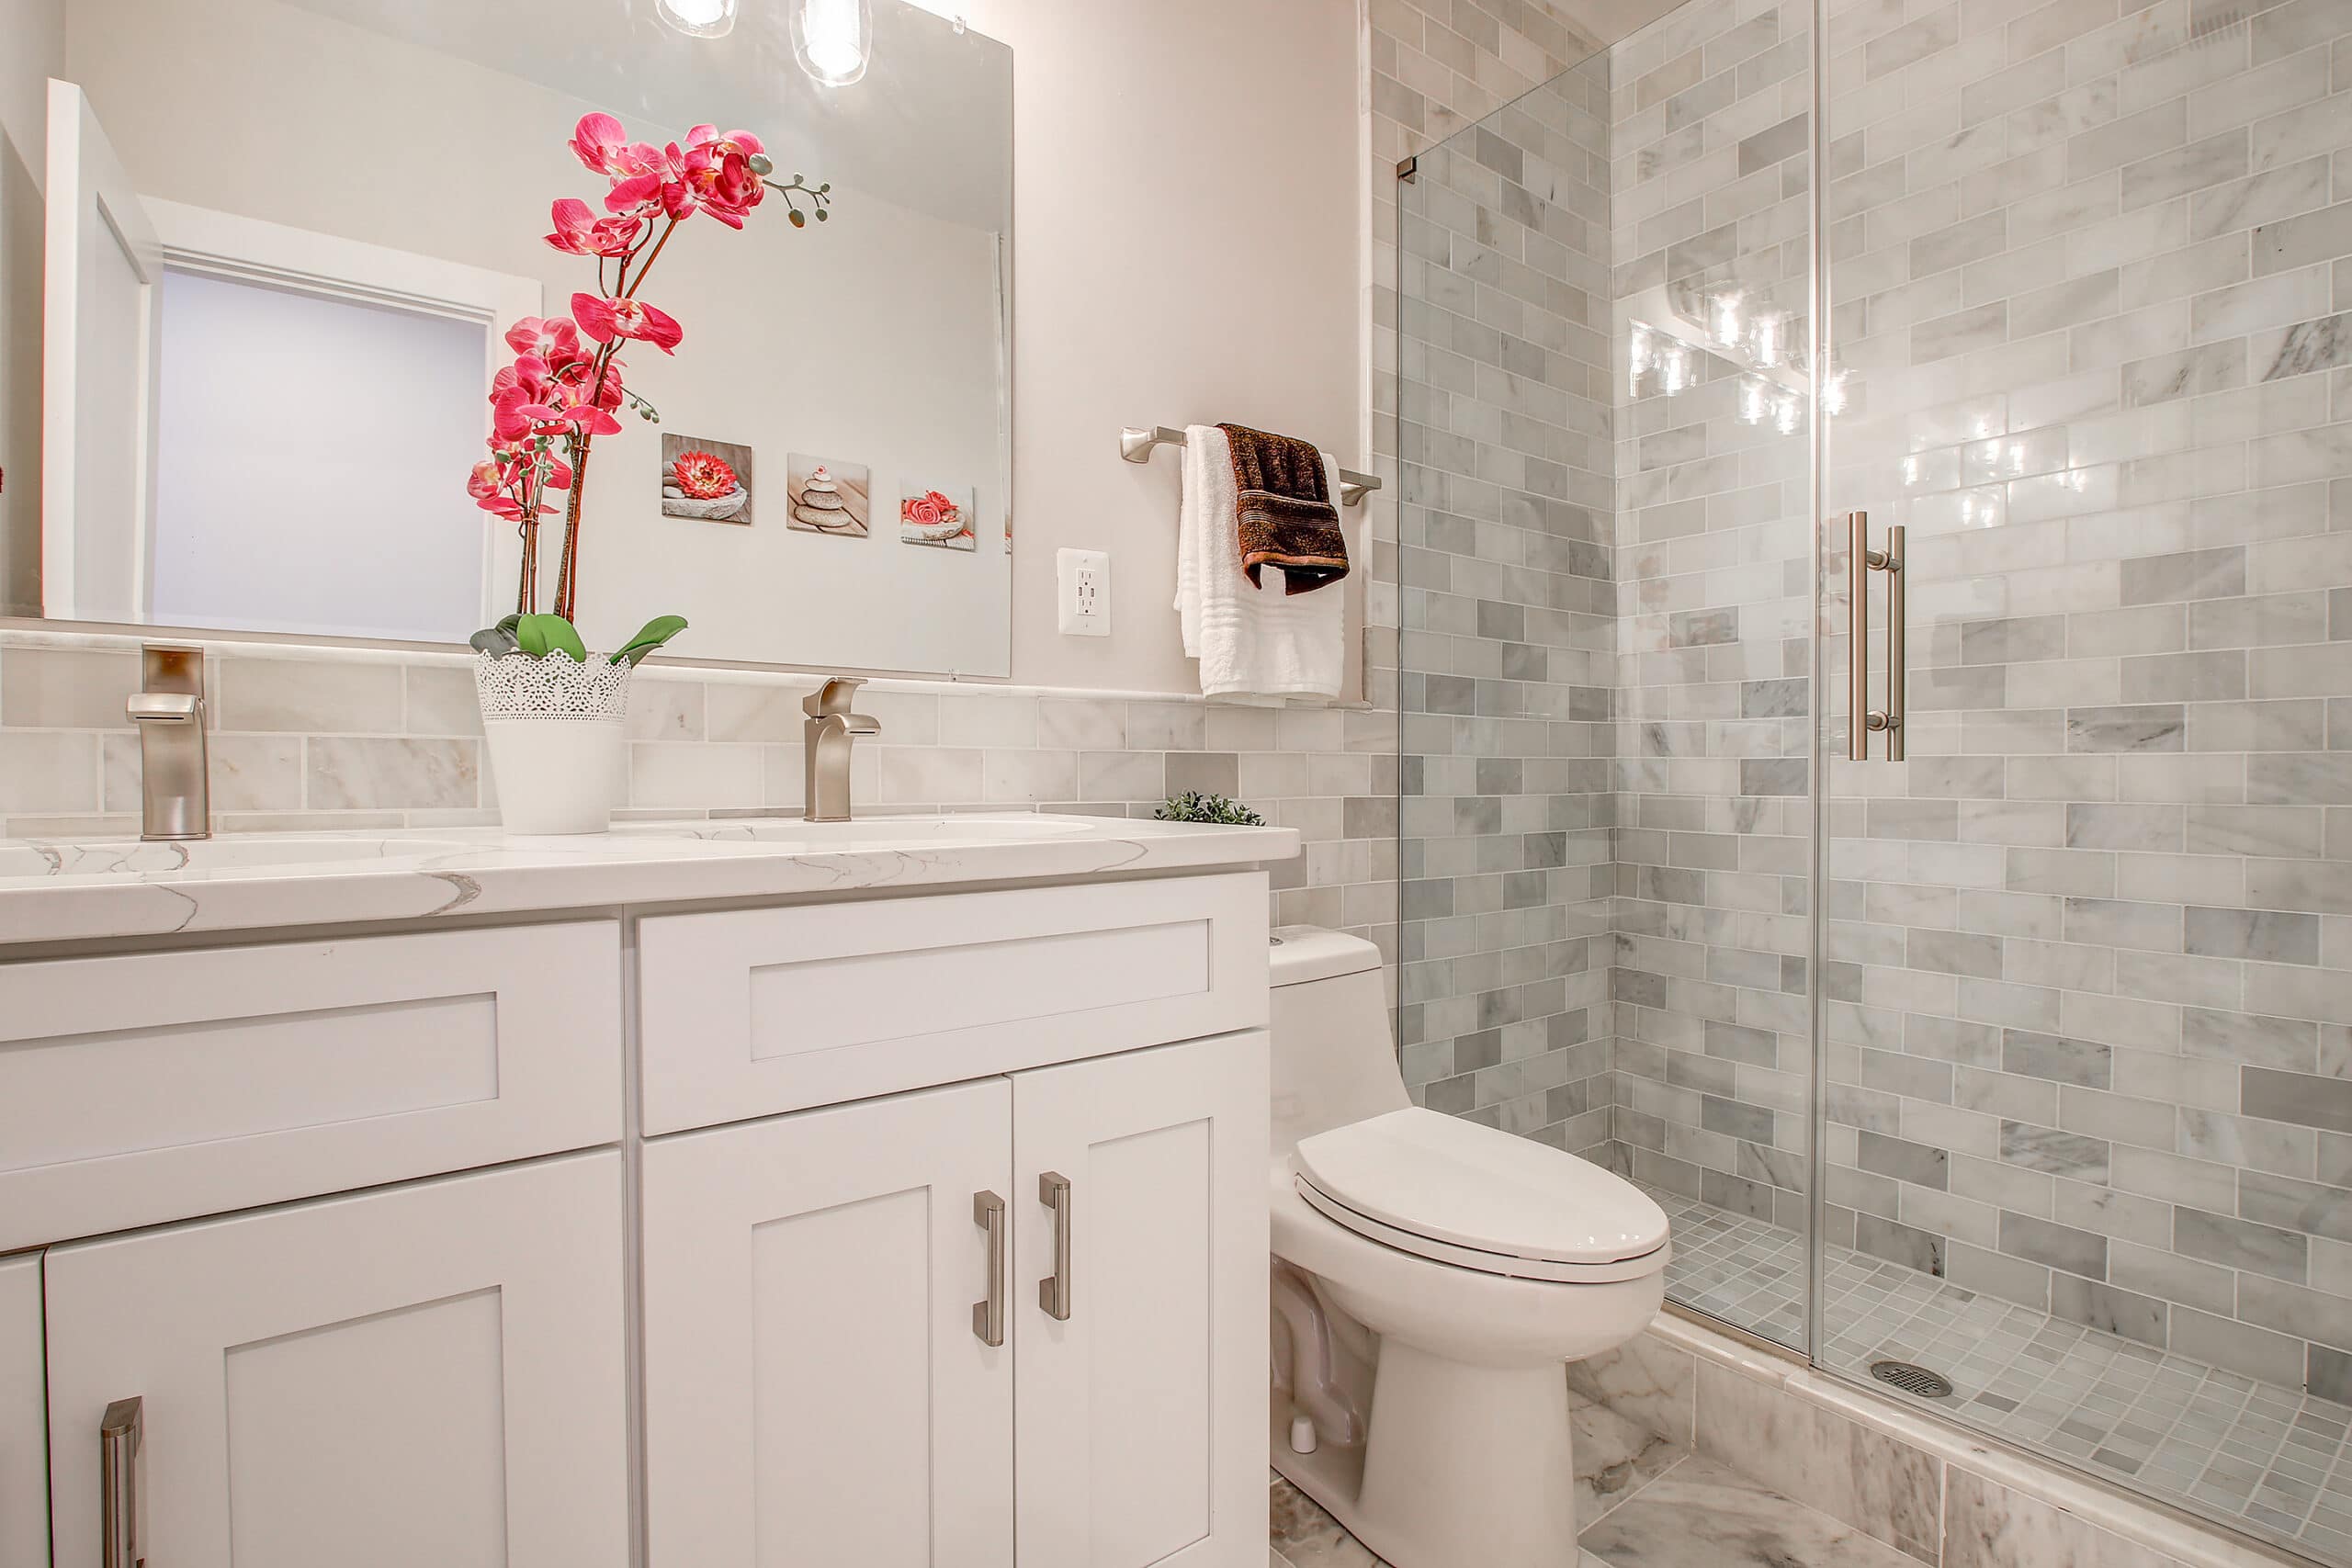 Bathroom Remodeling Process: Everything You Need to Know